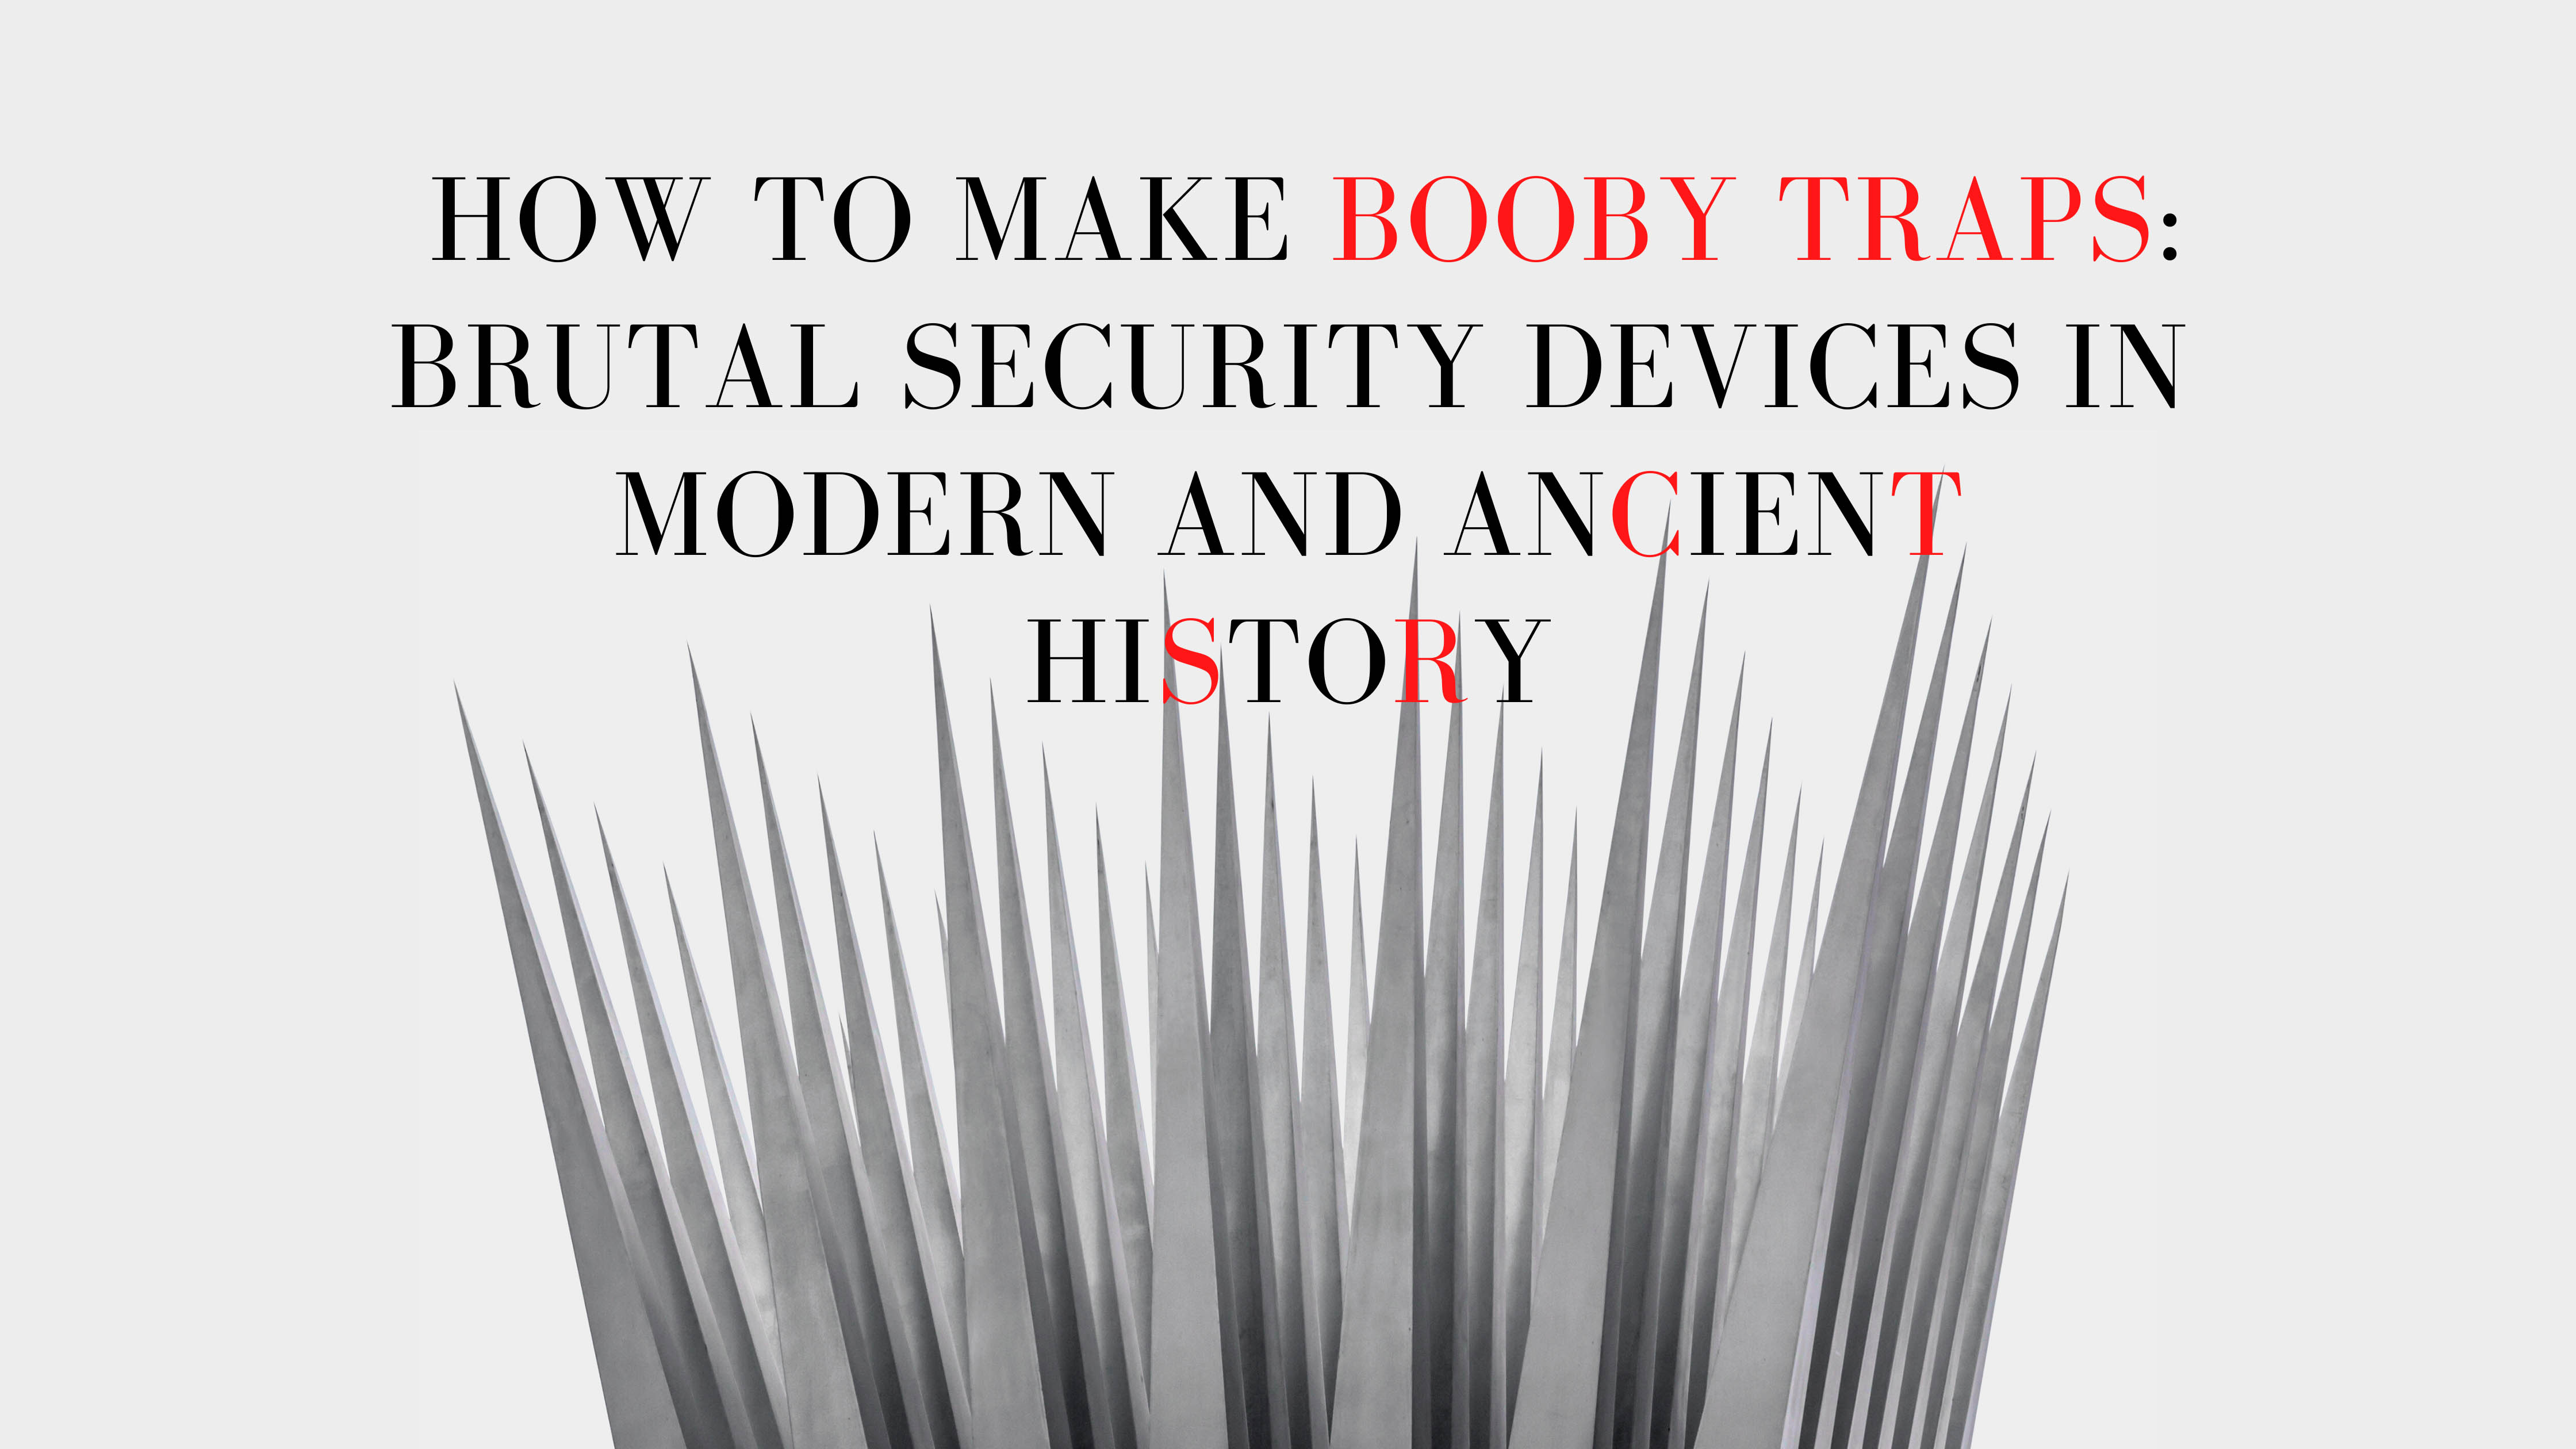 Title Card: How to Make Booby Traps: Brutal Security Devices In Modern and Ancient History